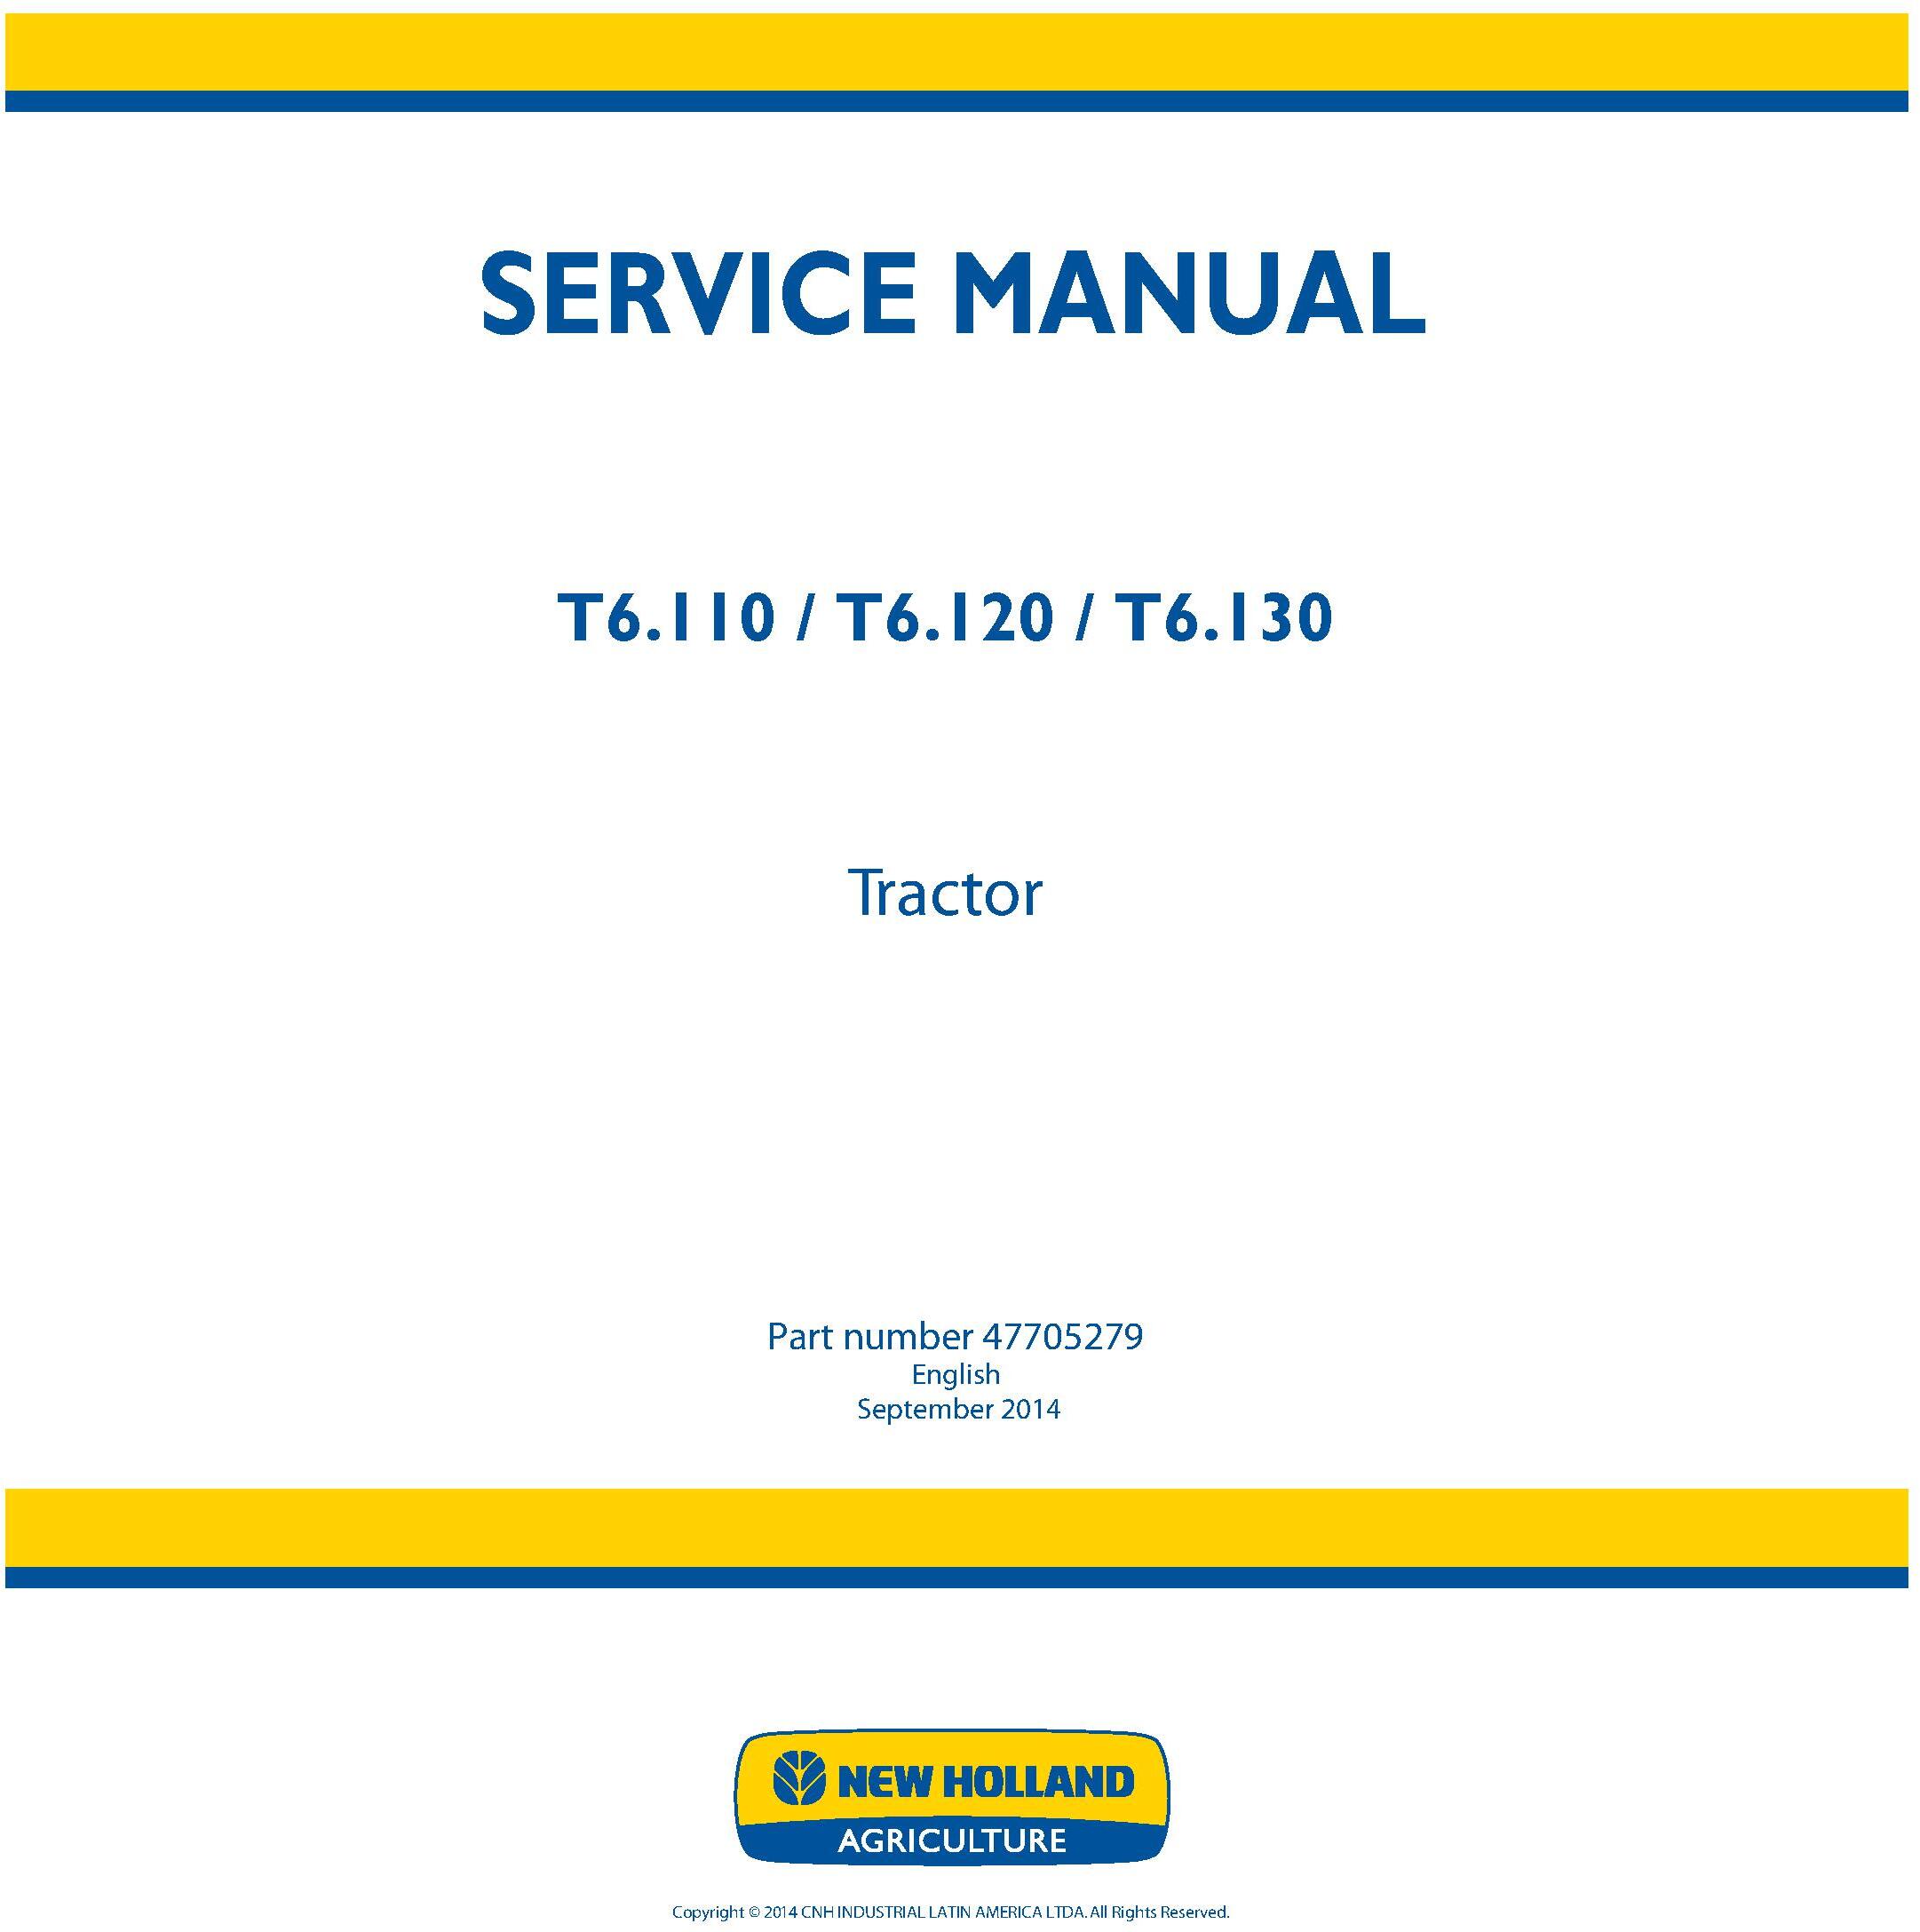 New Holland T6.110, T6.120, T6.130 Tractor Service Manual (Latin America) - 19404